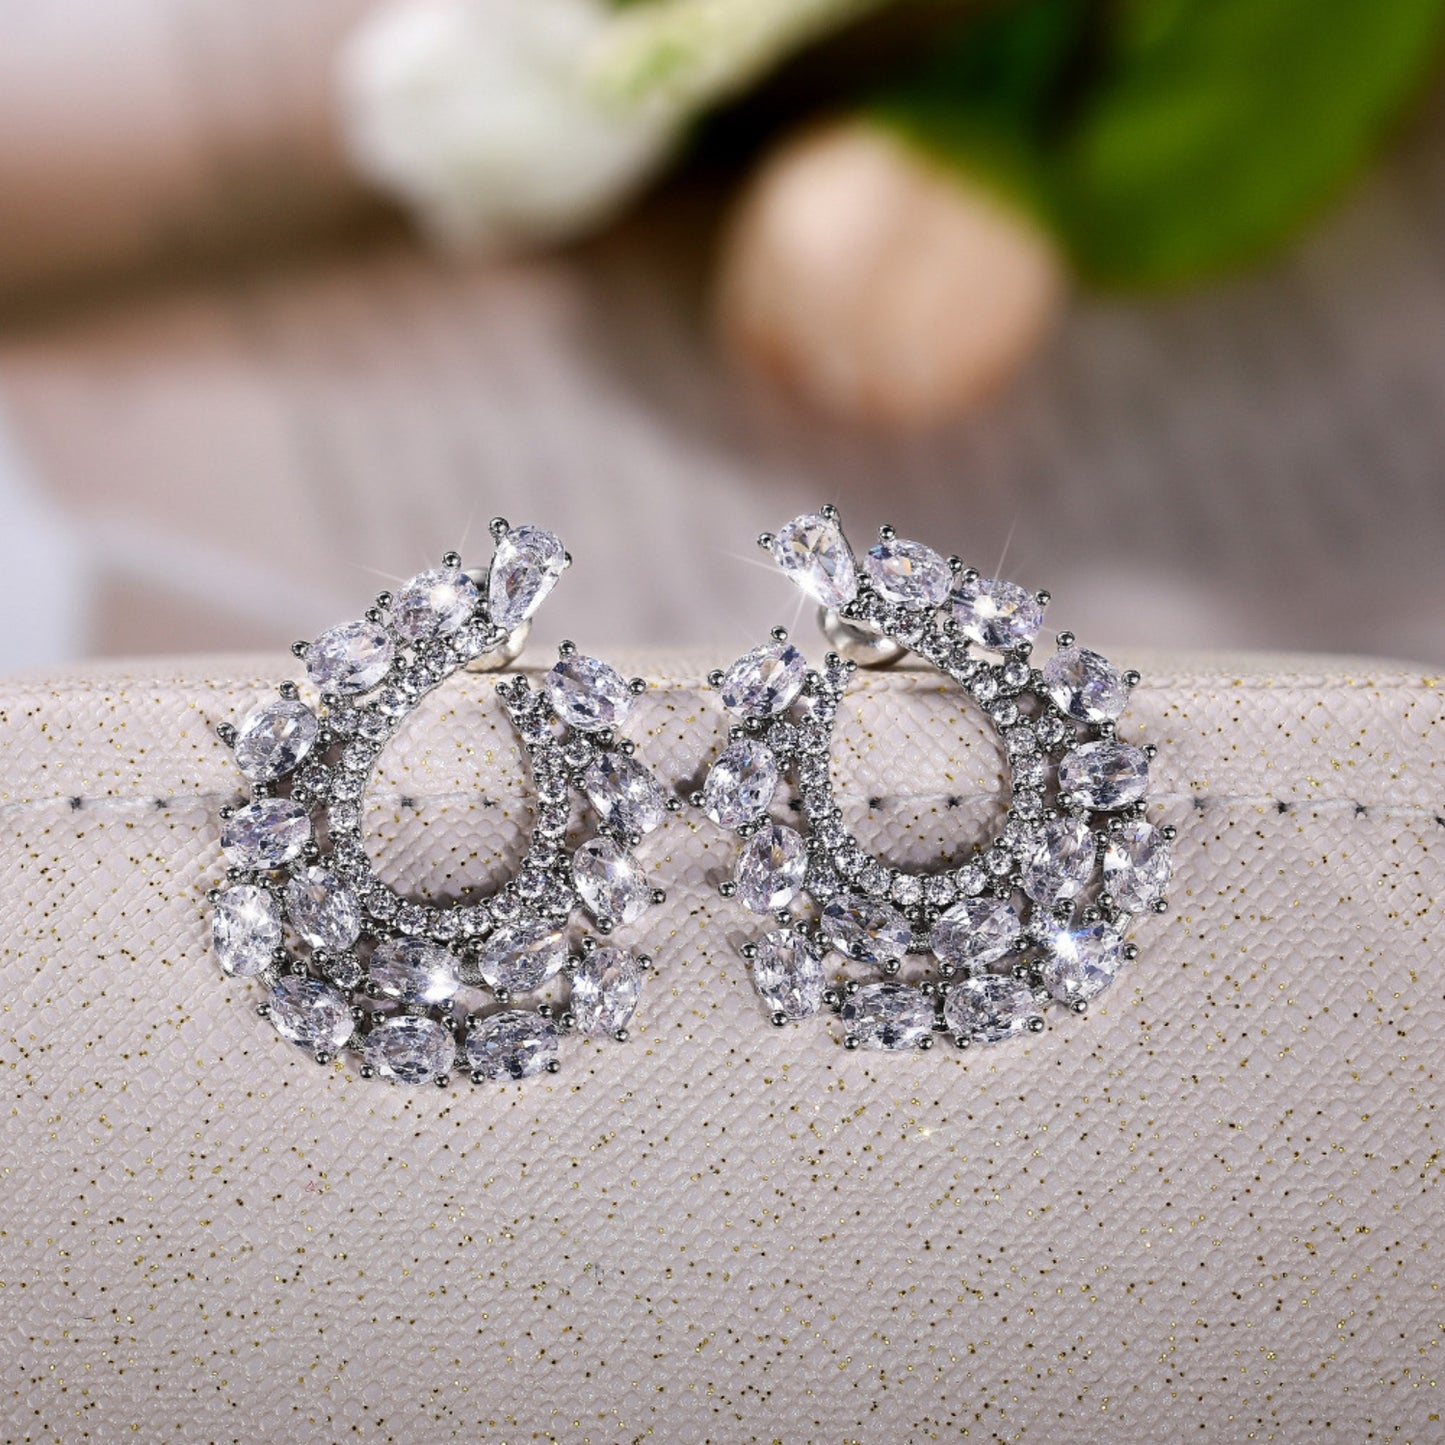 Cluster Earrings for Women Gorgeous Marquis-Cut Cubic Zirconia Bridal Wedding Banquet Stud Earrings for Bride Bridesmaids